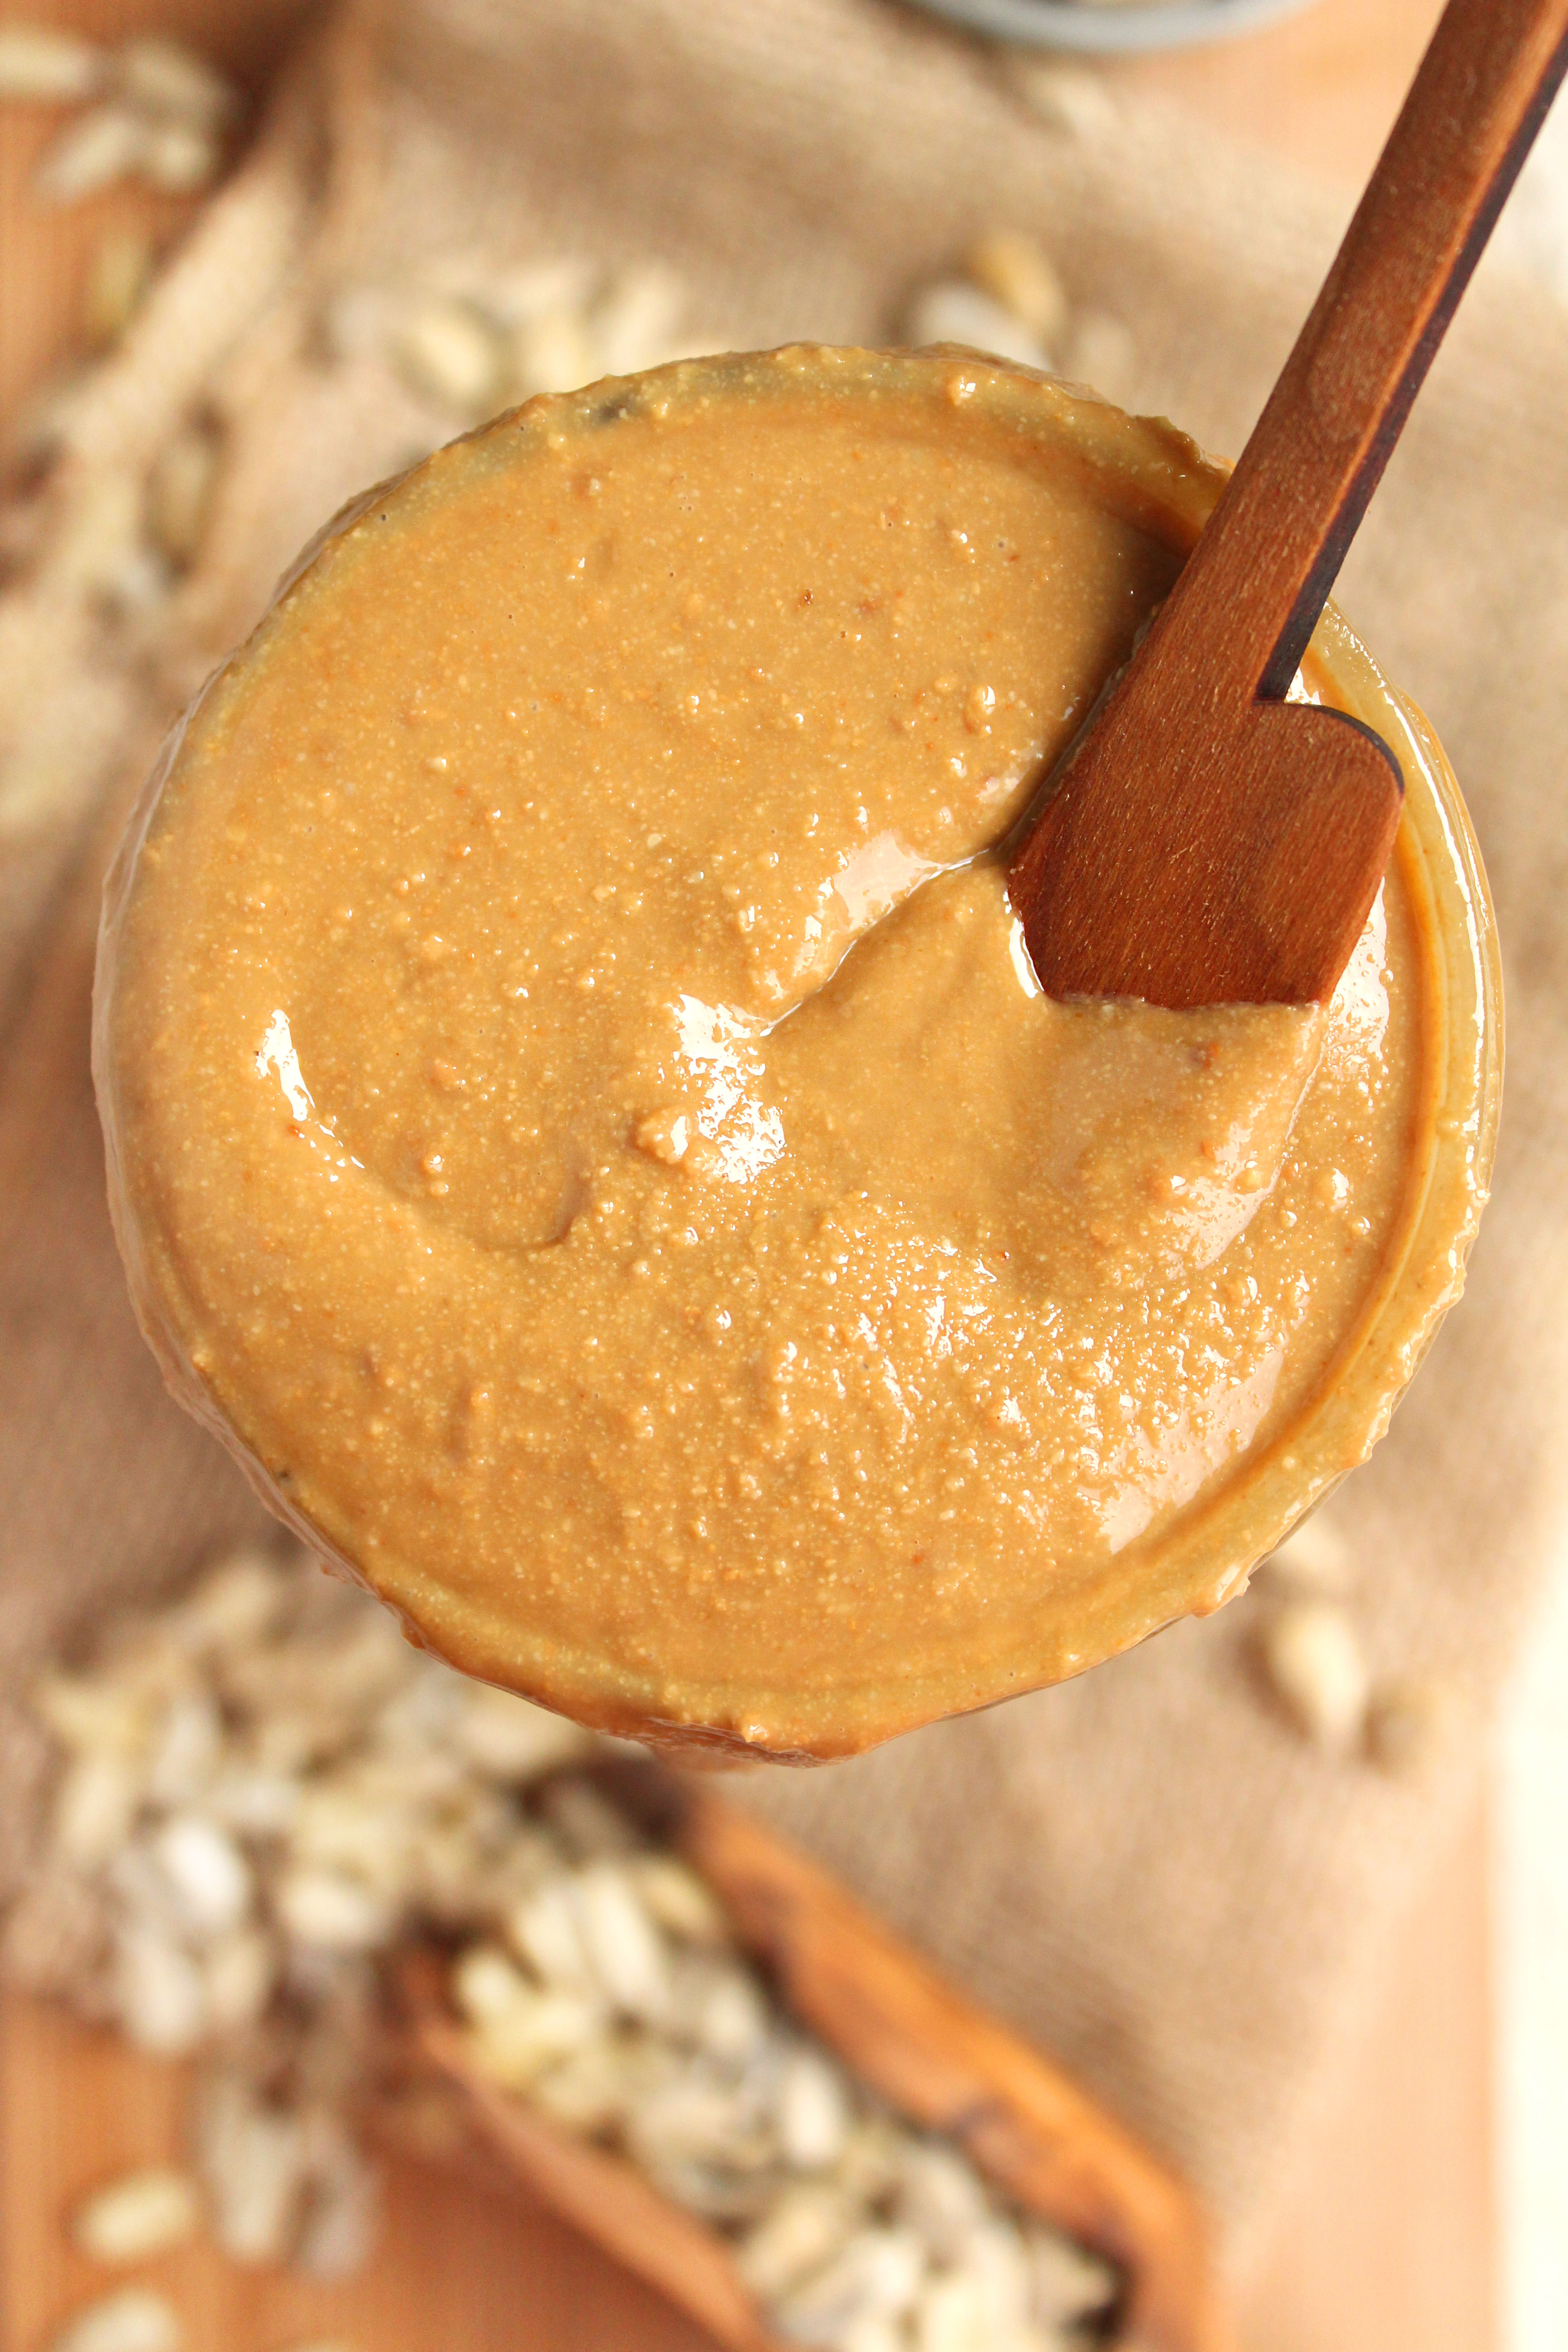 AMAZING Homemade Sunflower Seed Butter! 2-ingredients, SUPER creamy, & surprisingly nutty! Great on toast, in smoothies, or just on a spoon! #vegan | Peachandthecobbler.com